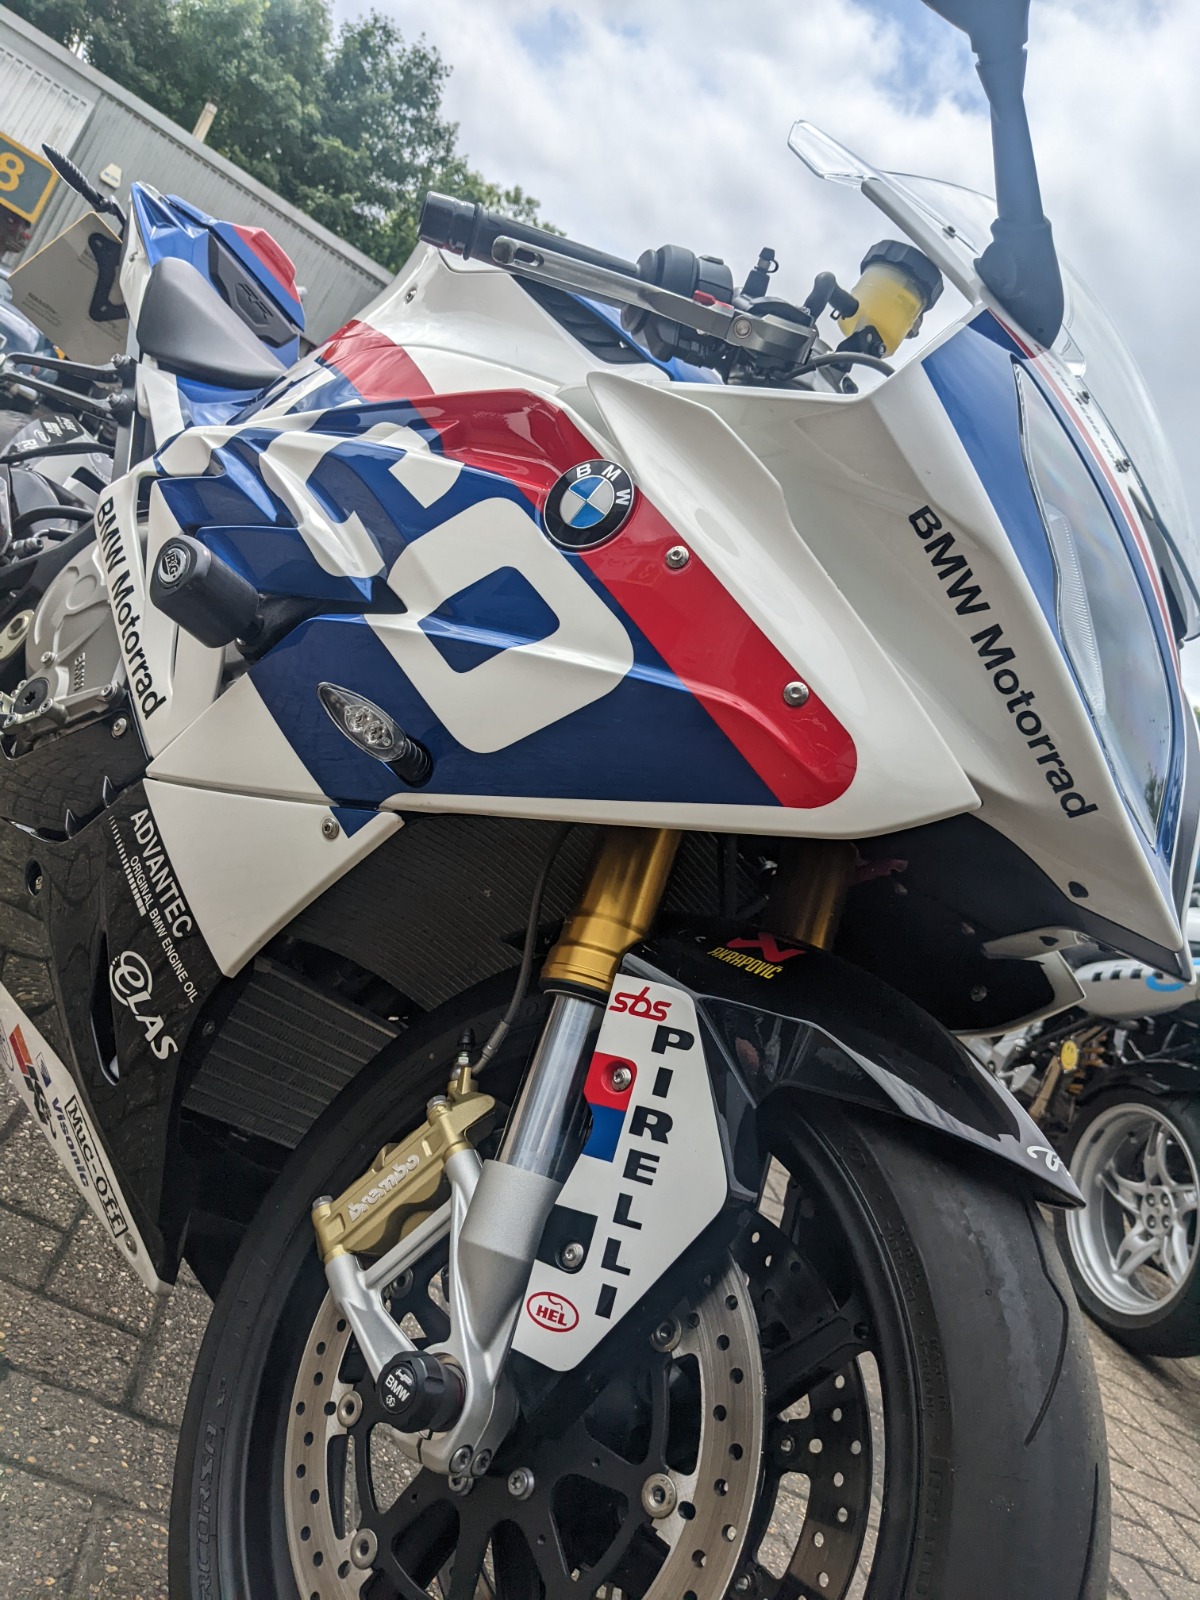 BMW Motorbike Repairs Southall And West London